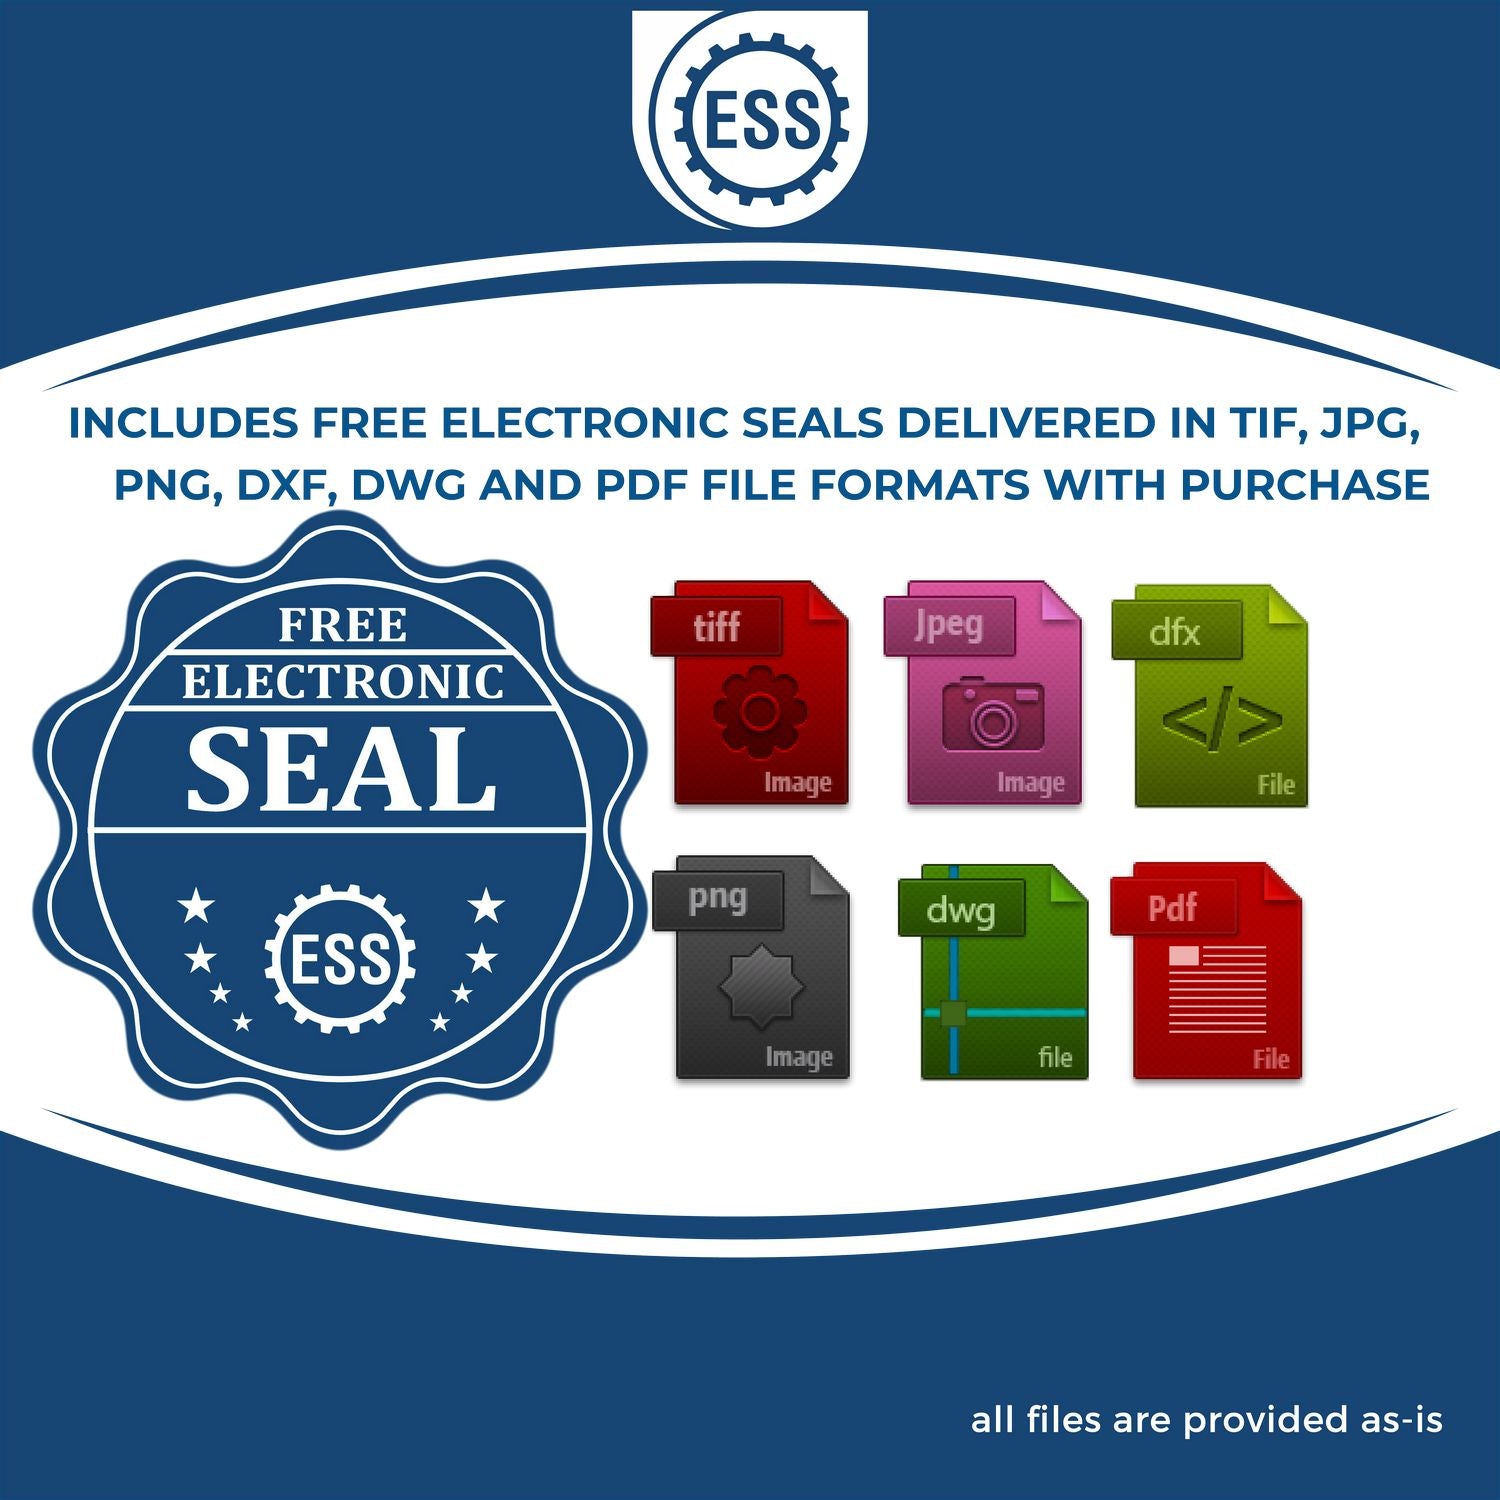 An infographic for the free electronic seal for the Handheld New Mexico Land Surveyor Seal illustrating the different file type icons such as DXF, DWG, TIF, JPG and PNG.